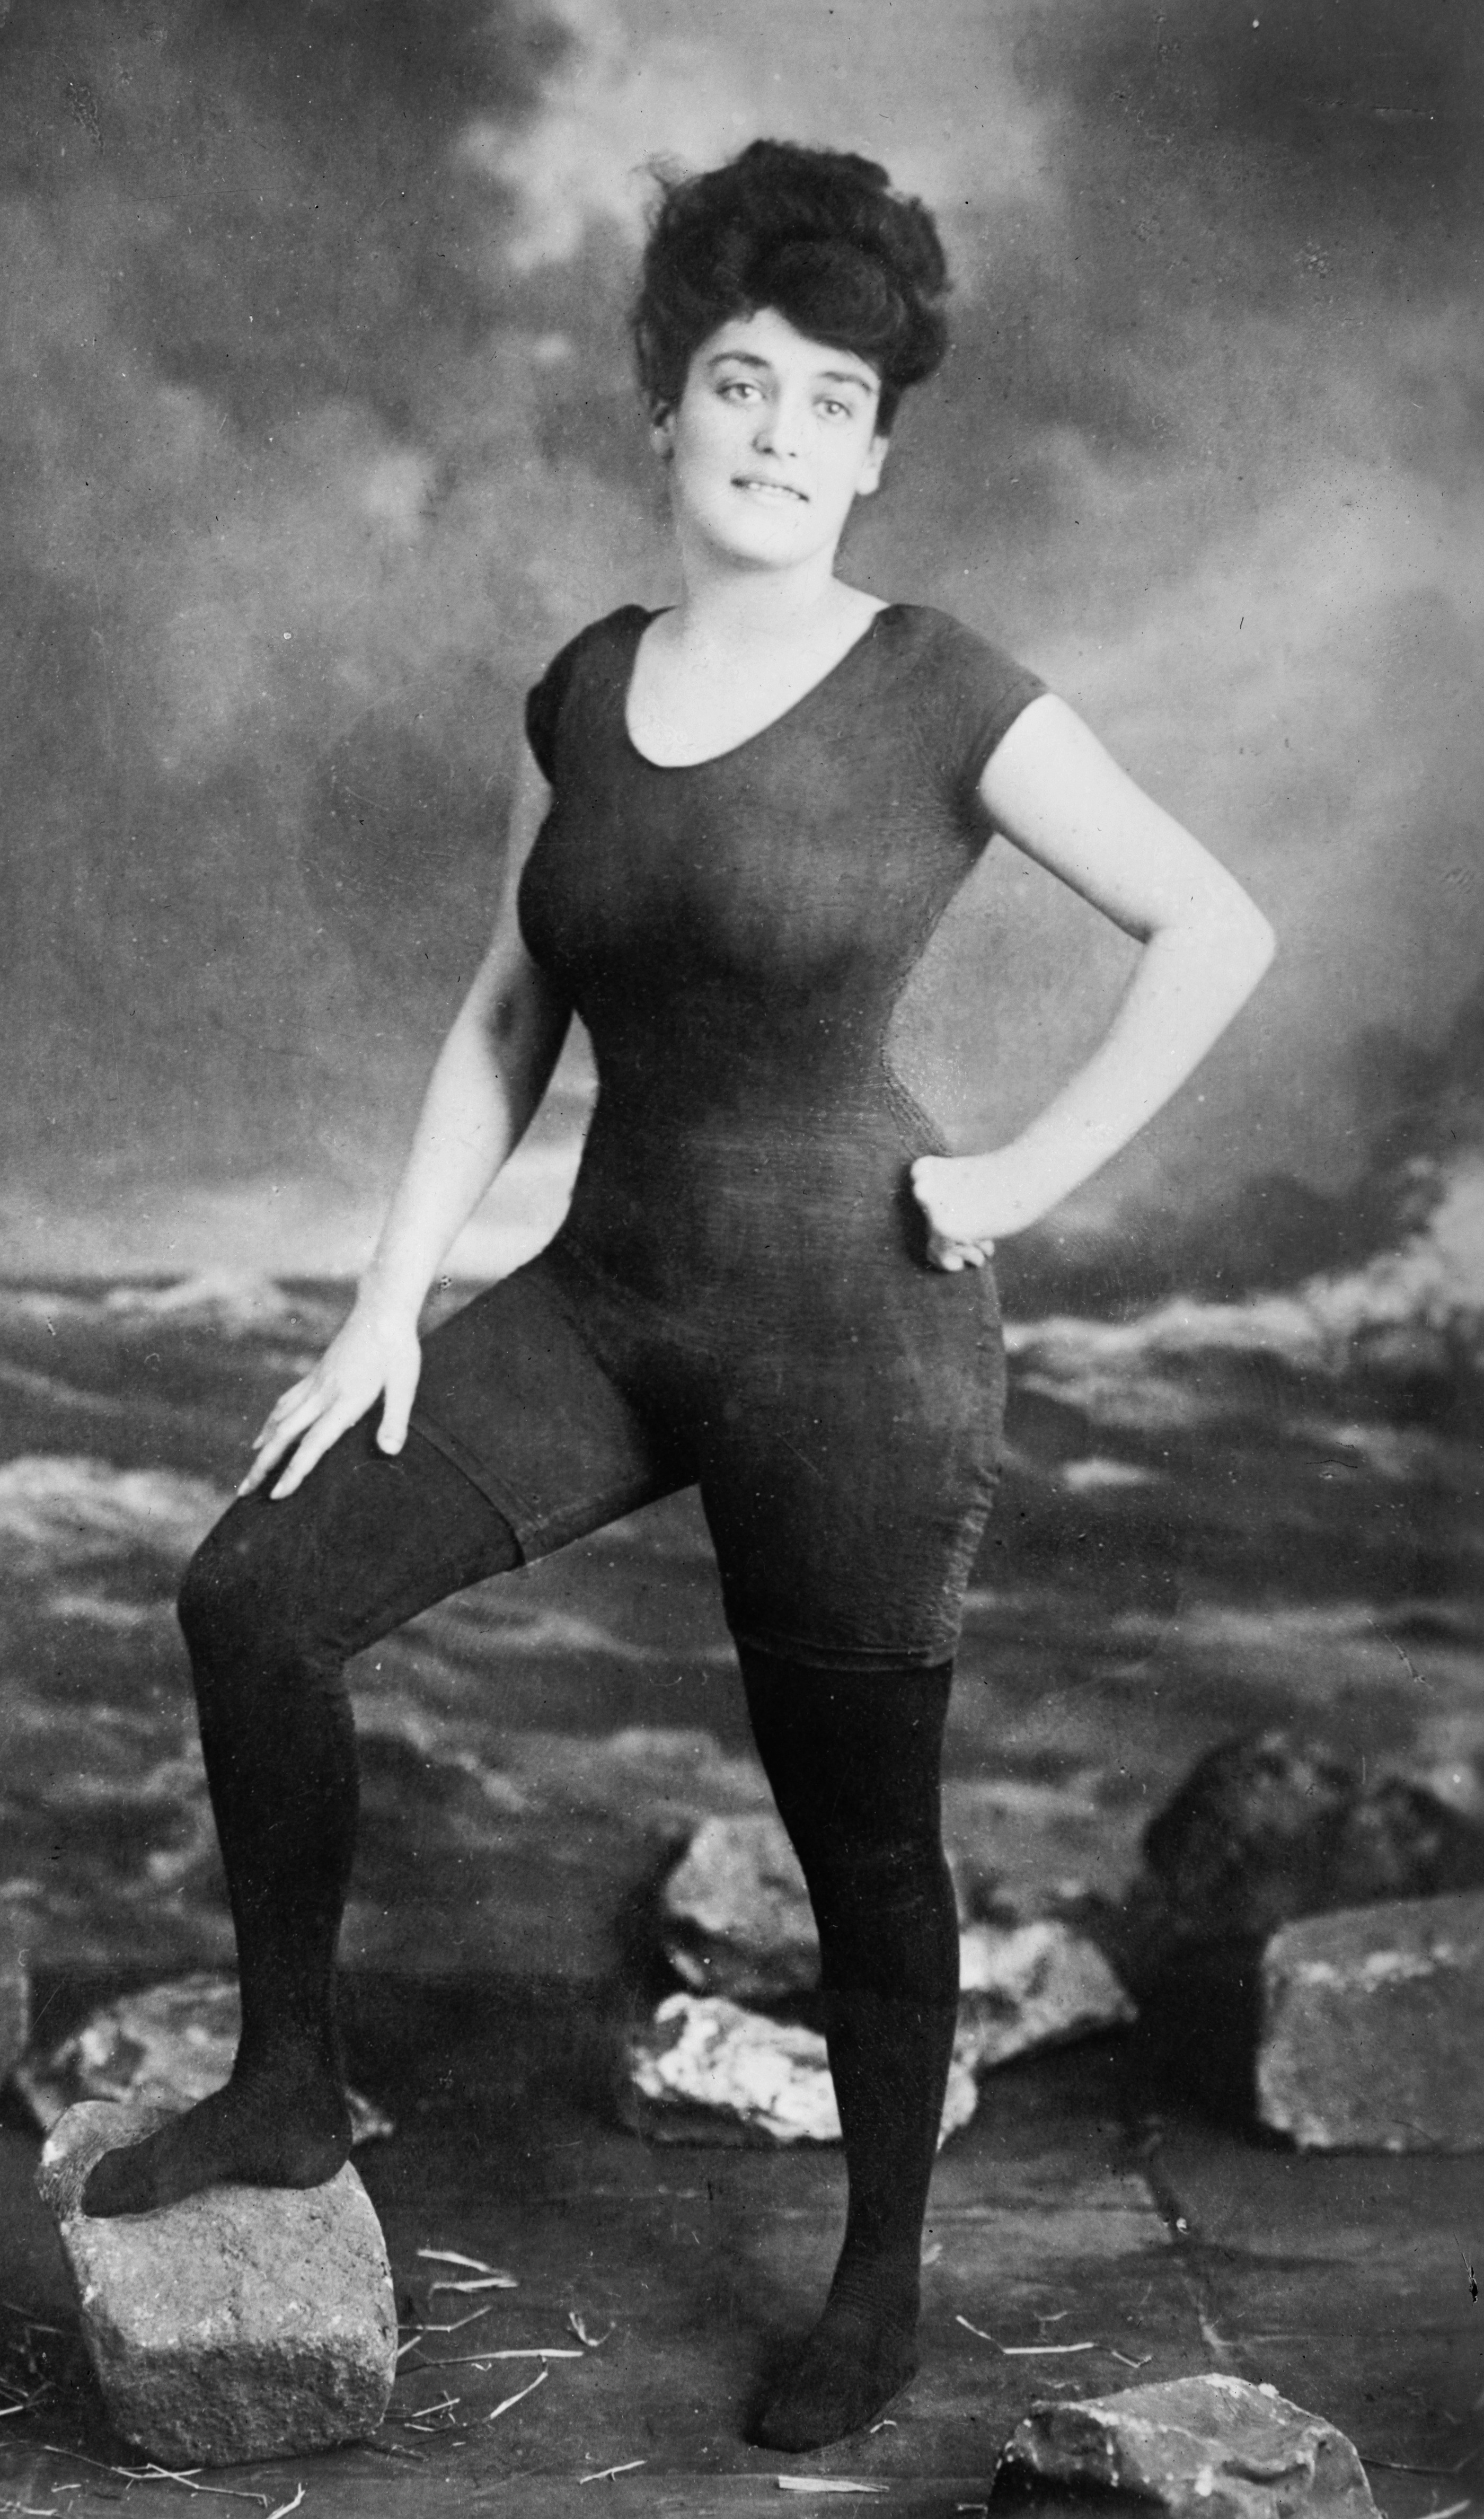 In 1907, when Australian swimmer Annette Kellerman (1887-1975) wore a one-piece suit that revealed her arms and legs, she was promptly arrested for indecent exposure.